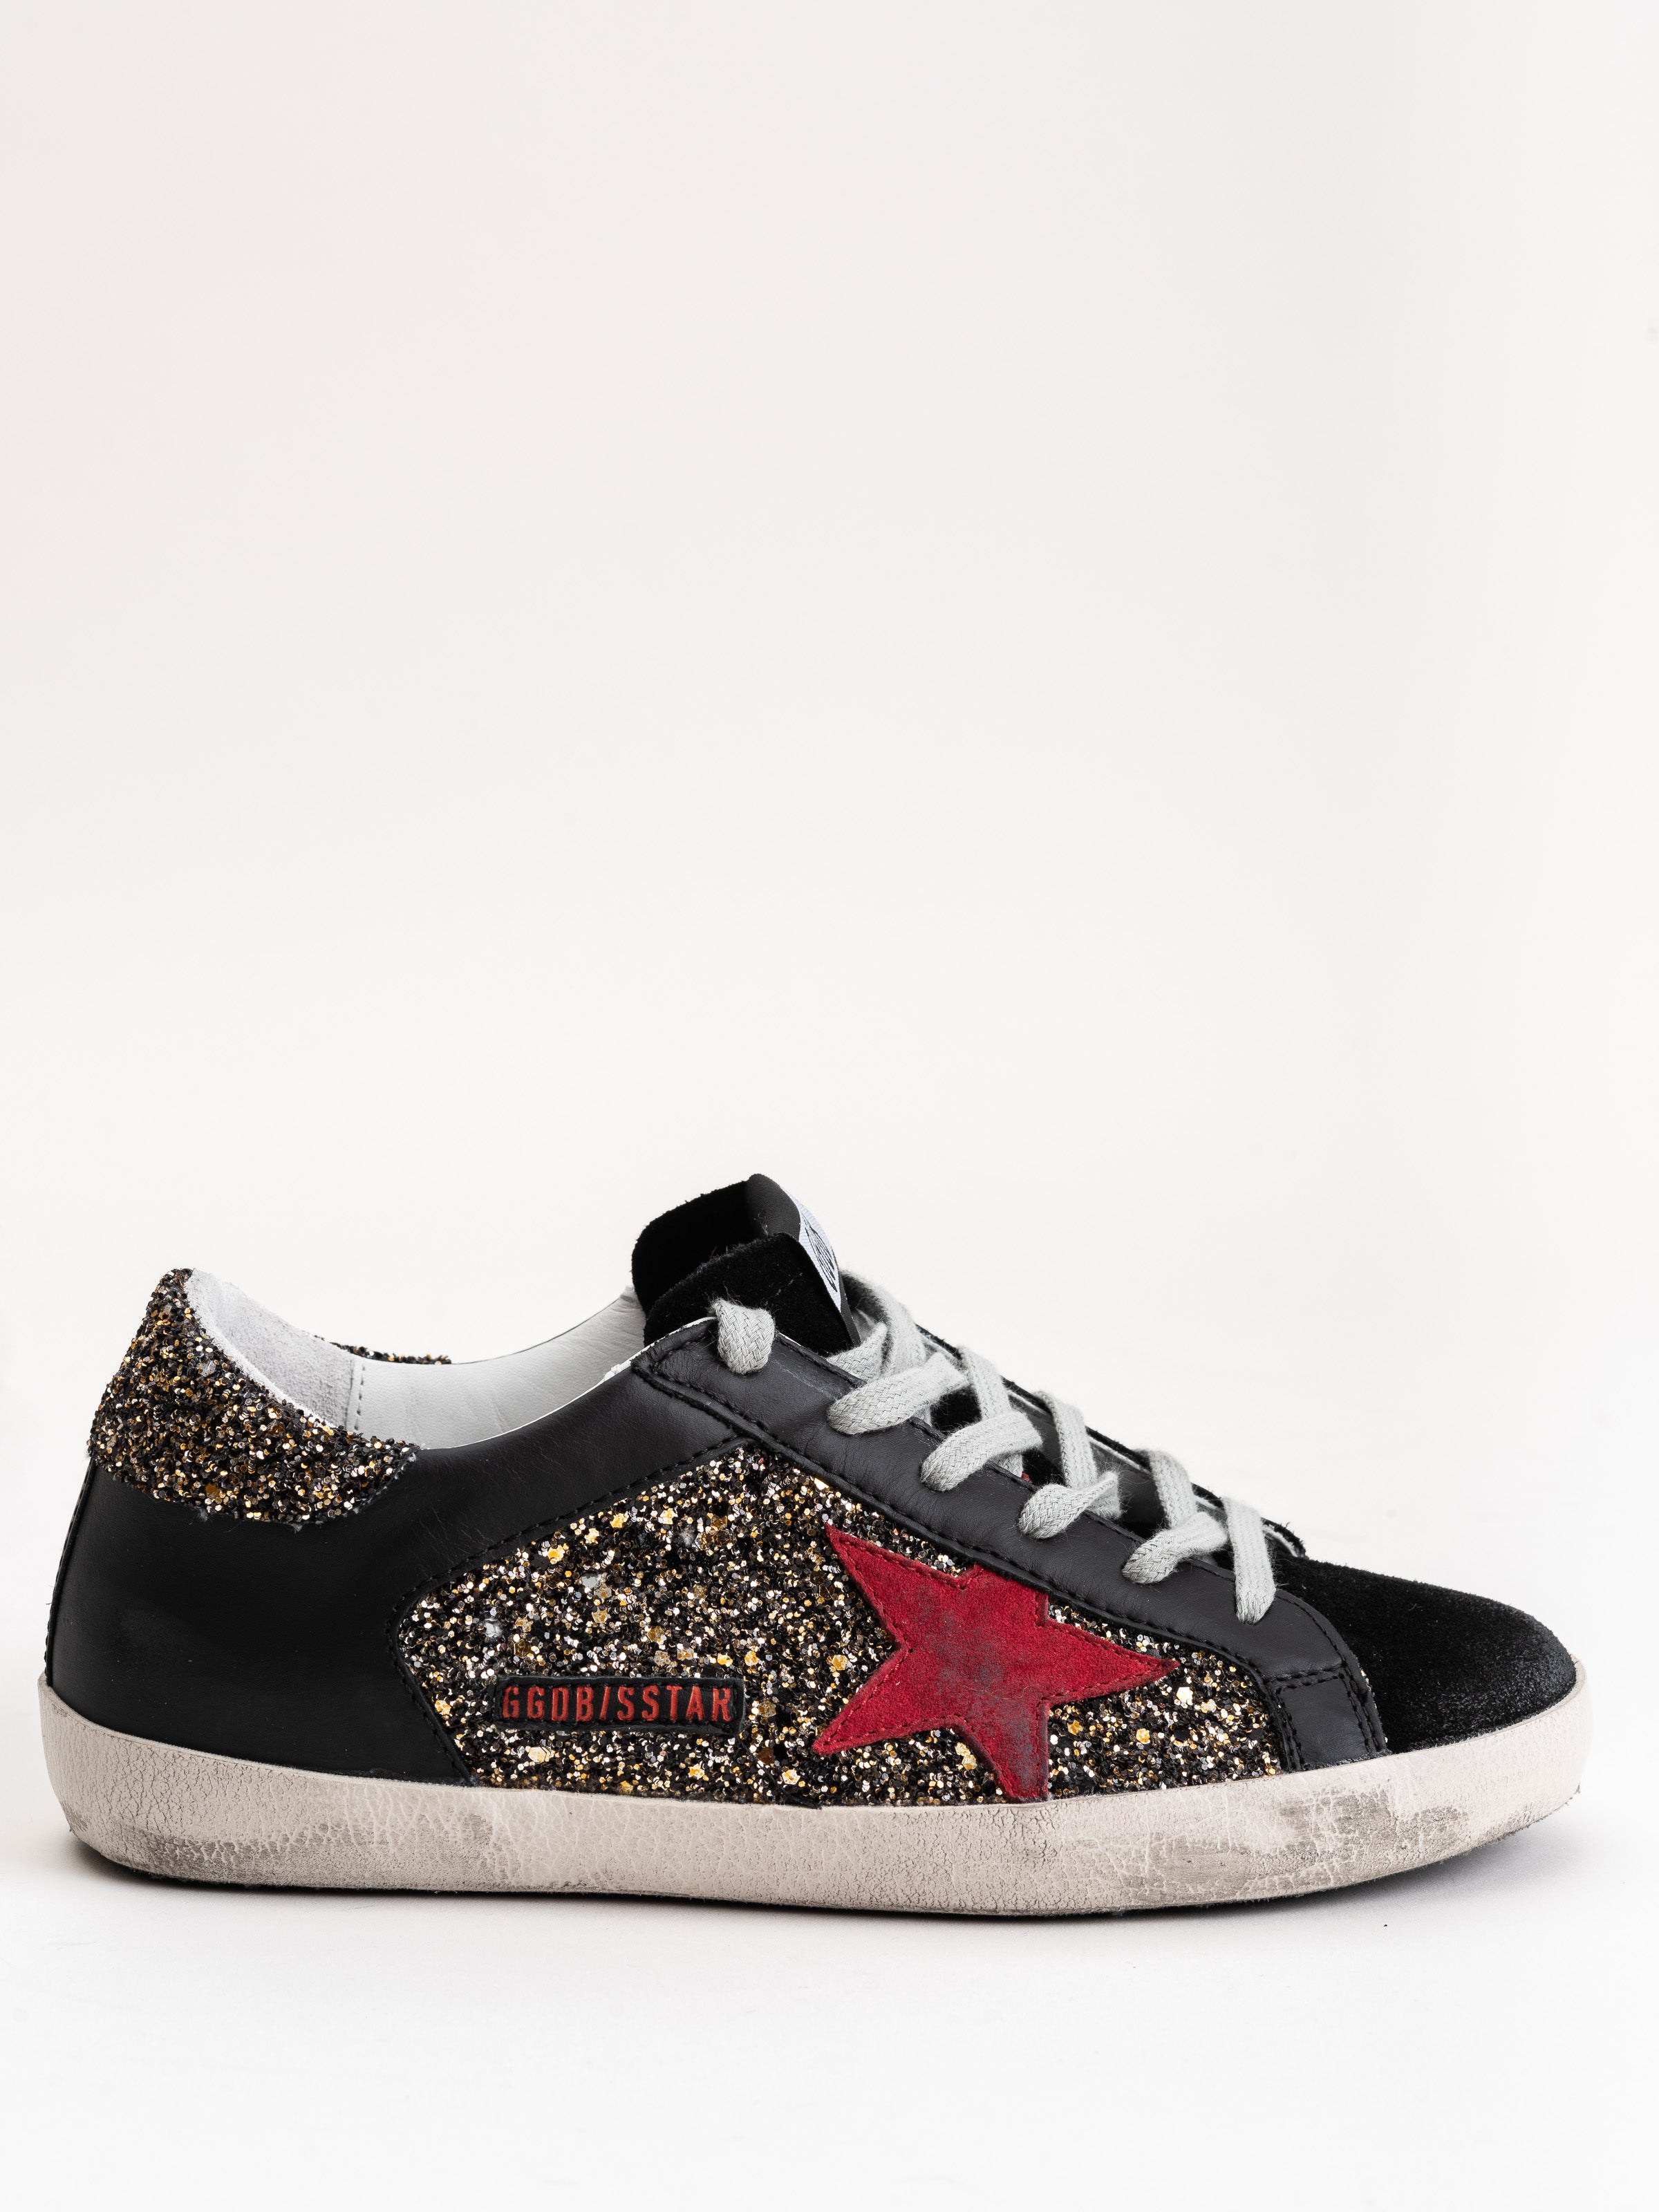 gold and silver golden goose sneakers